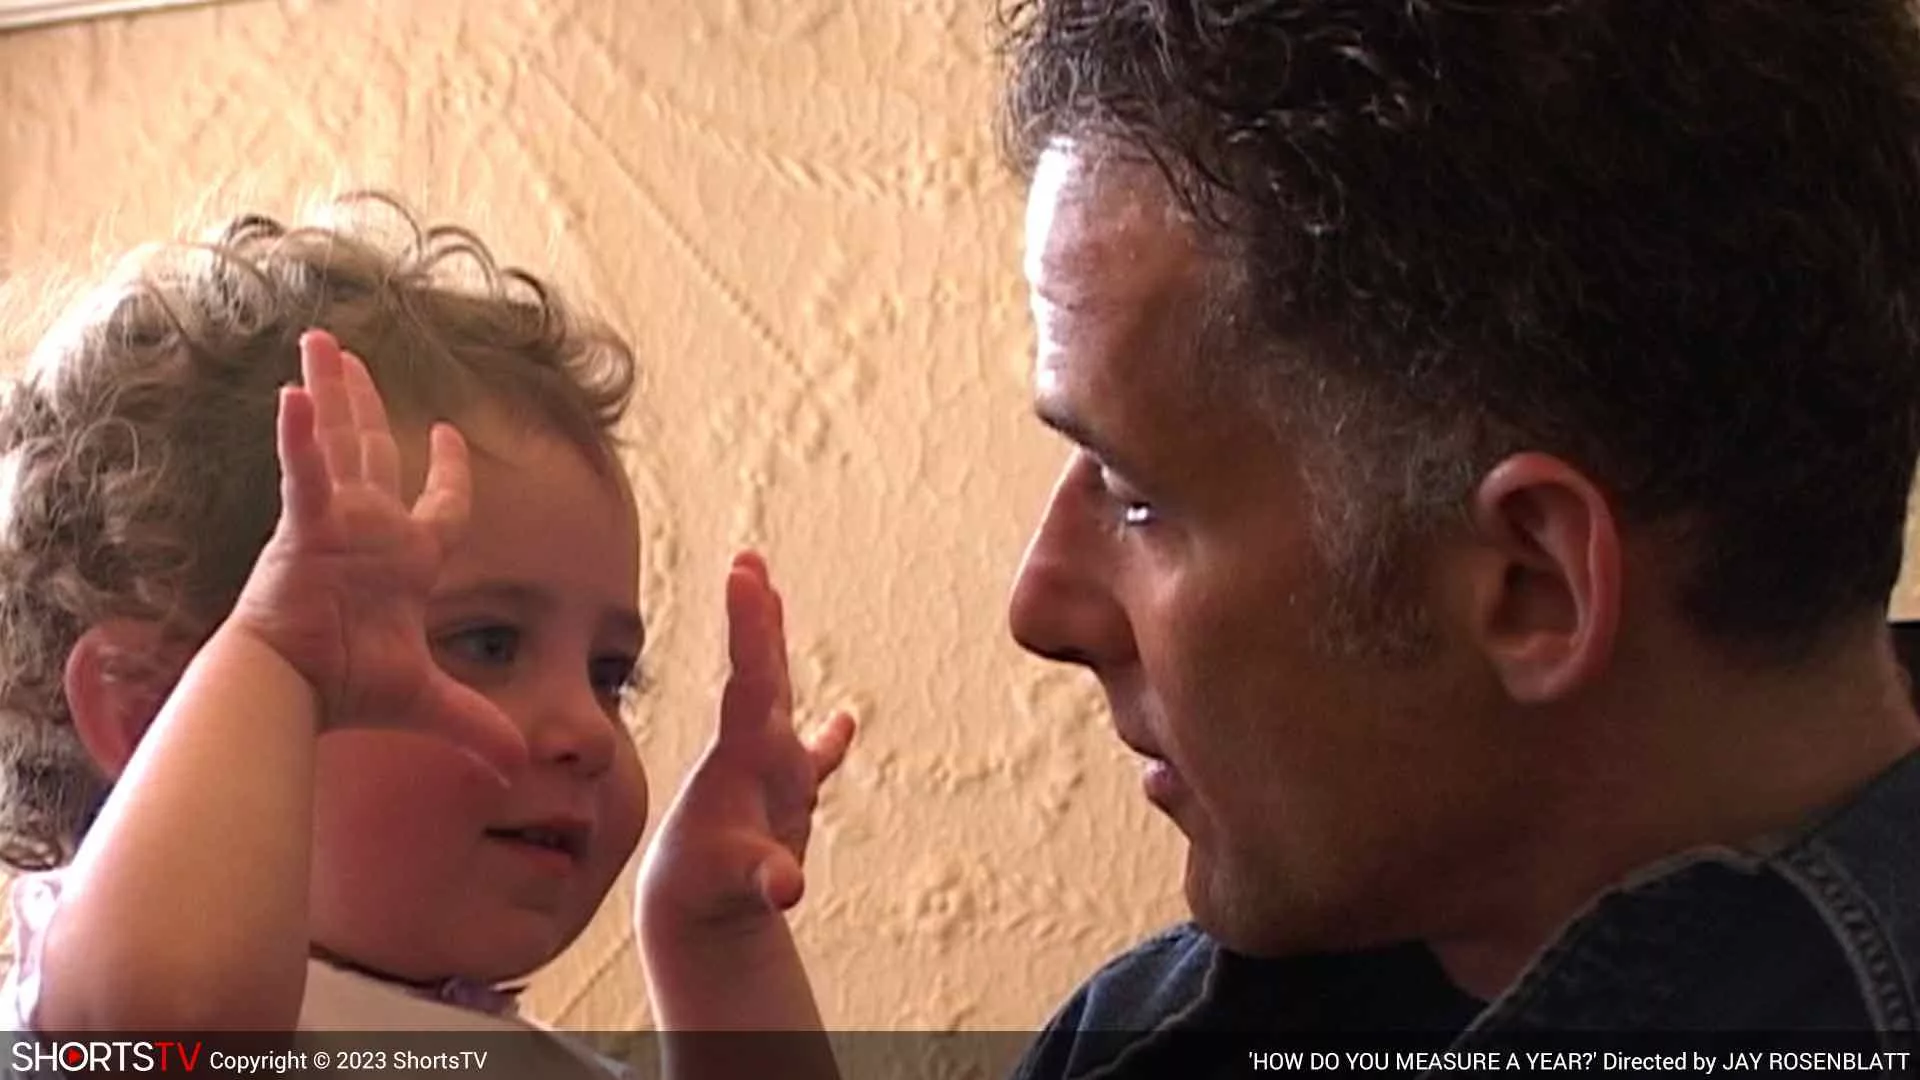 A father (Jay Rosenblatt) watching his little curly-haired daughter (Ella) as she shows him her palms in How do you measure a year?, an Oscar 2023 nominated short documentary